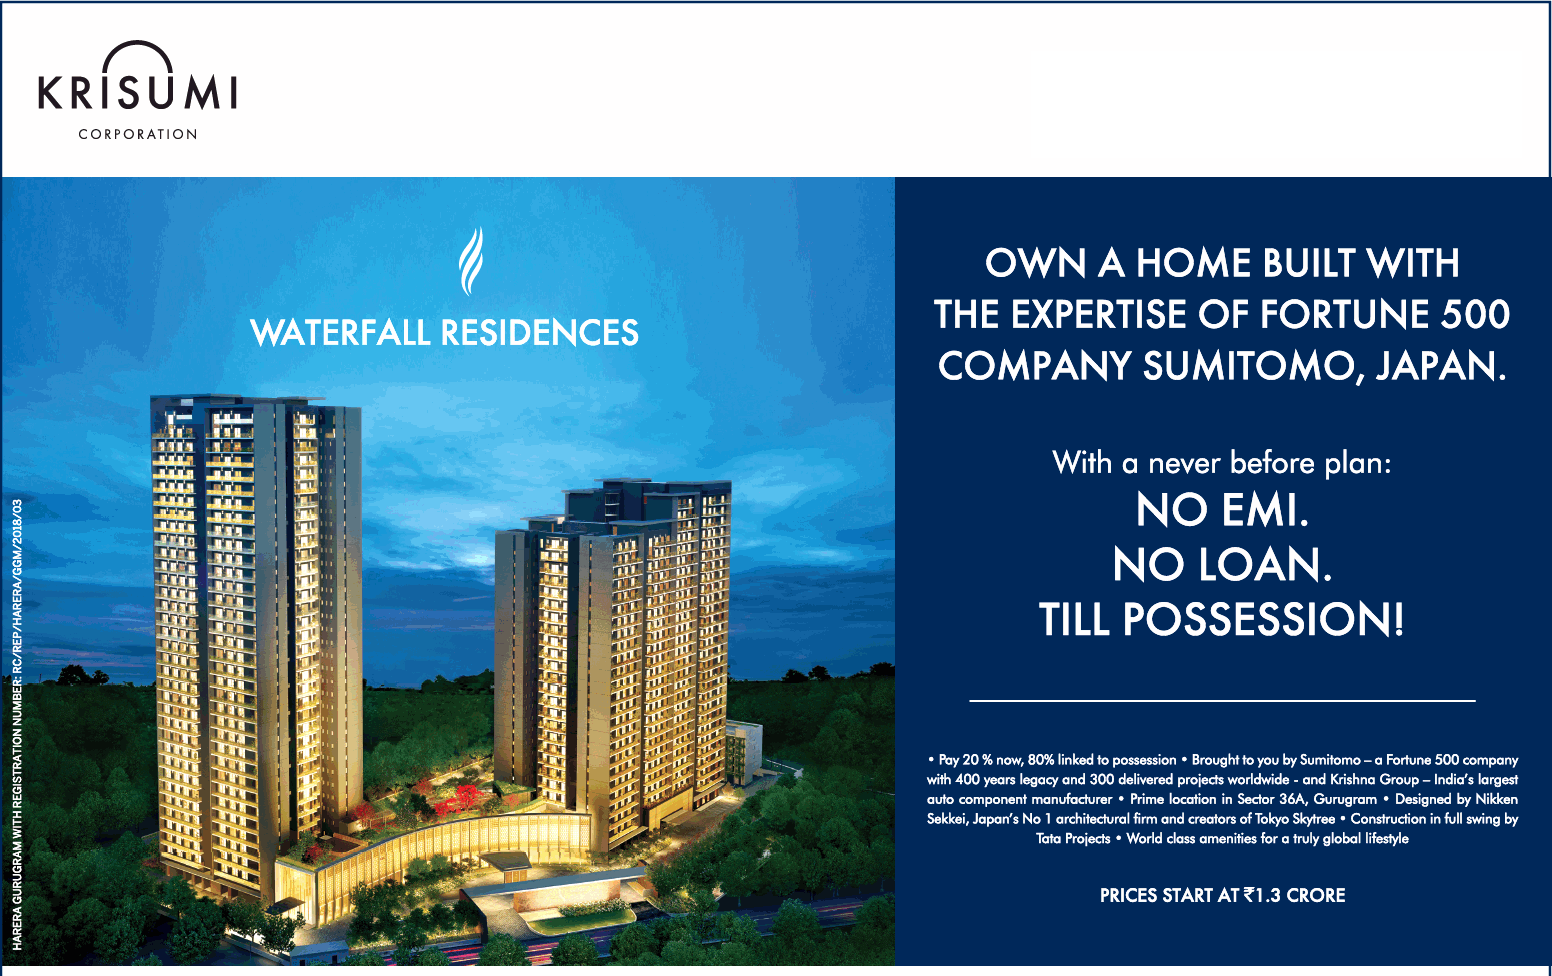 With a never before plan no EMI, no loan, till possession at Krisumi Waterfall Residences, Gurgaon